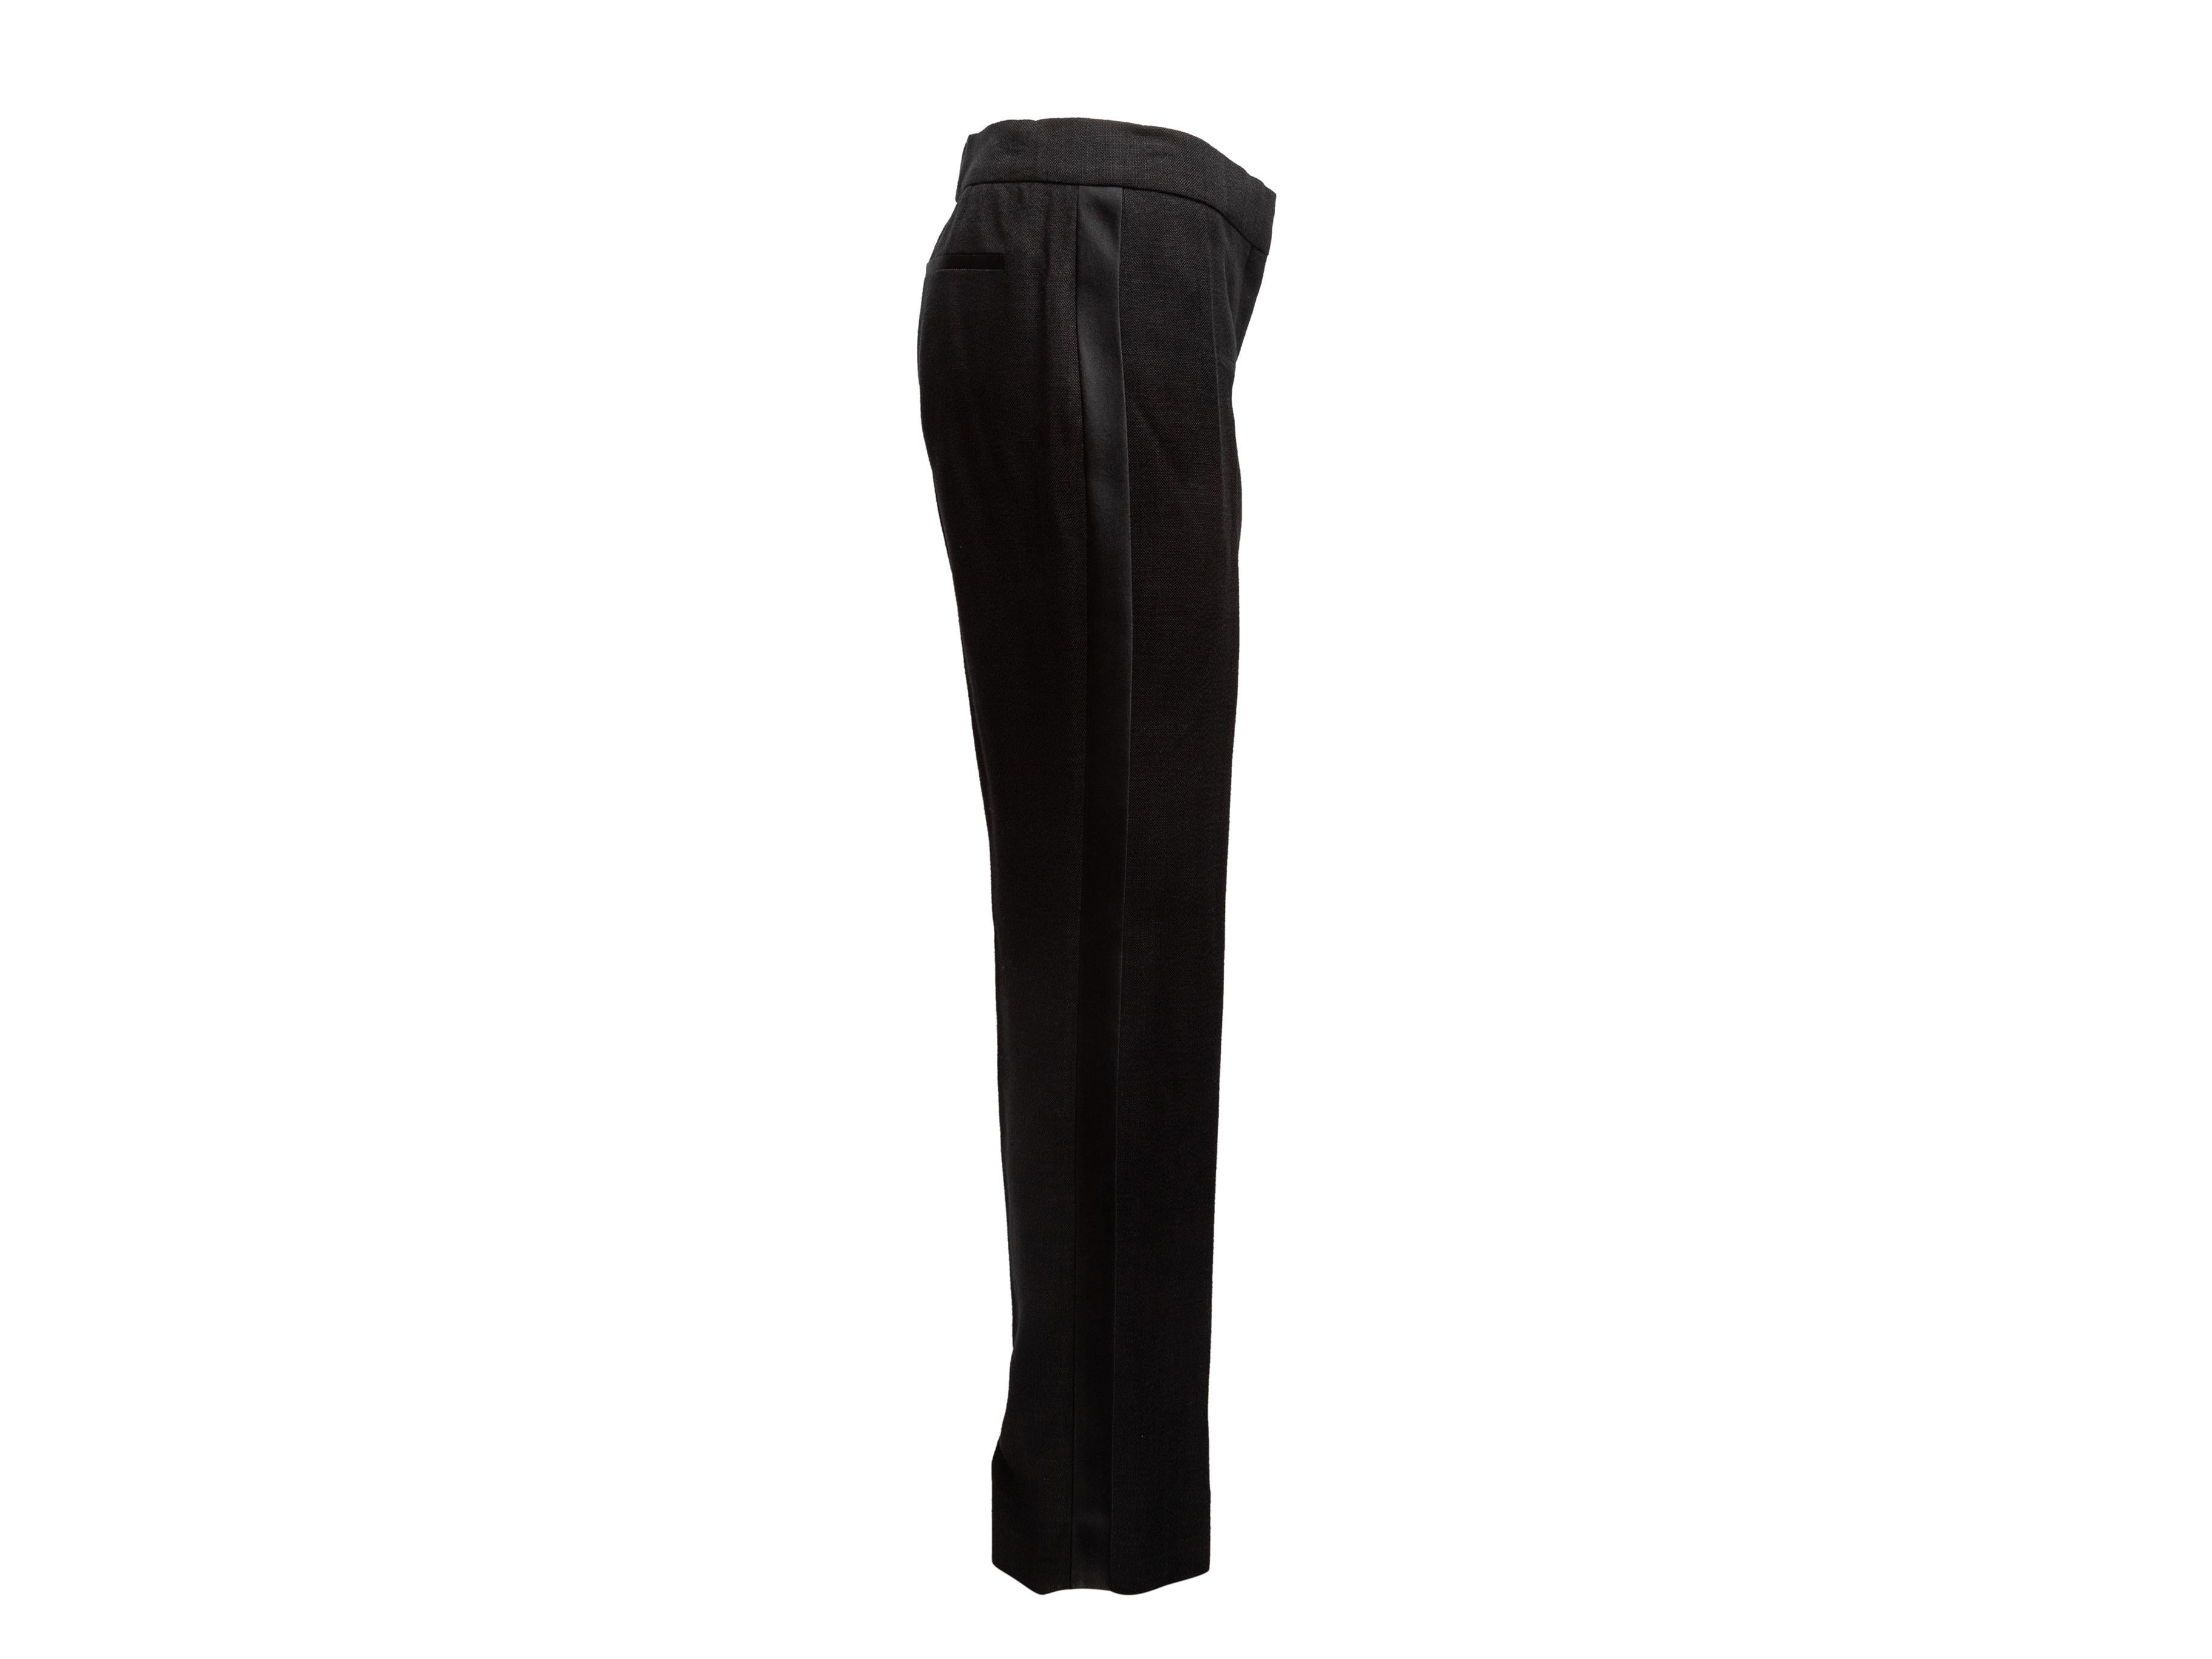 Product Details: Black linen and satin straight-leg trousers by Tom Ford. Dual back pockets. Zip closure at front. 30